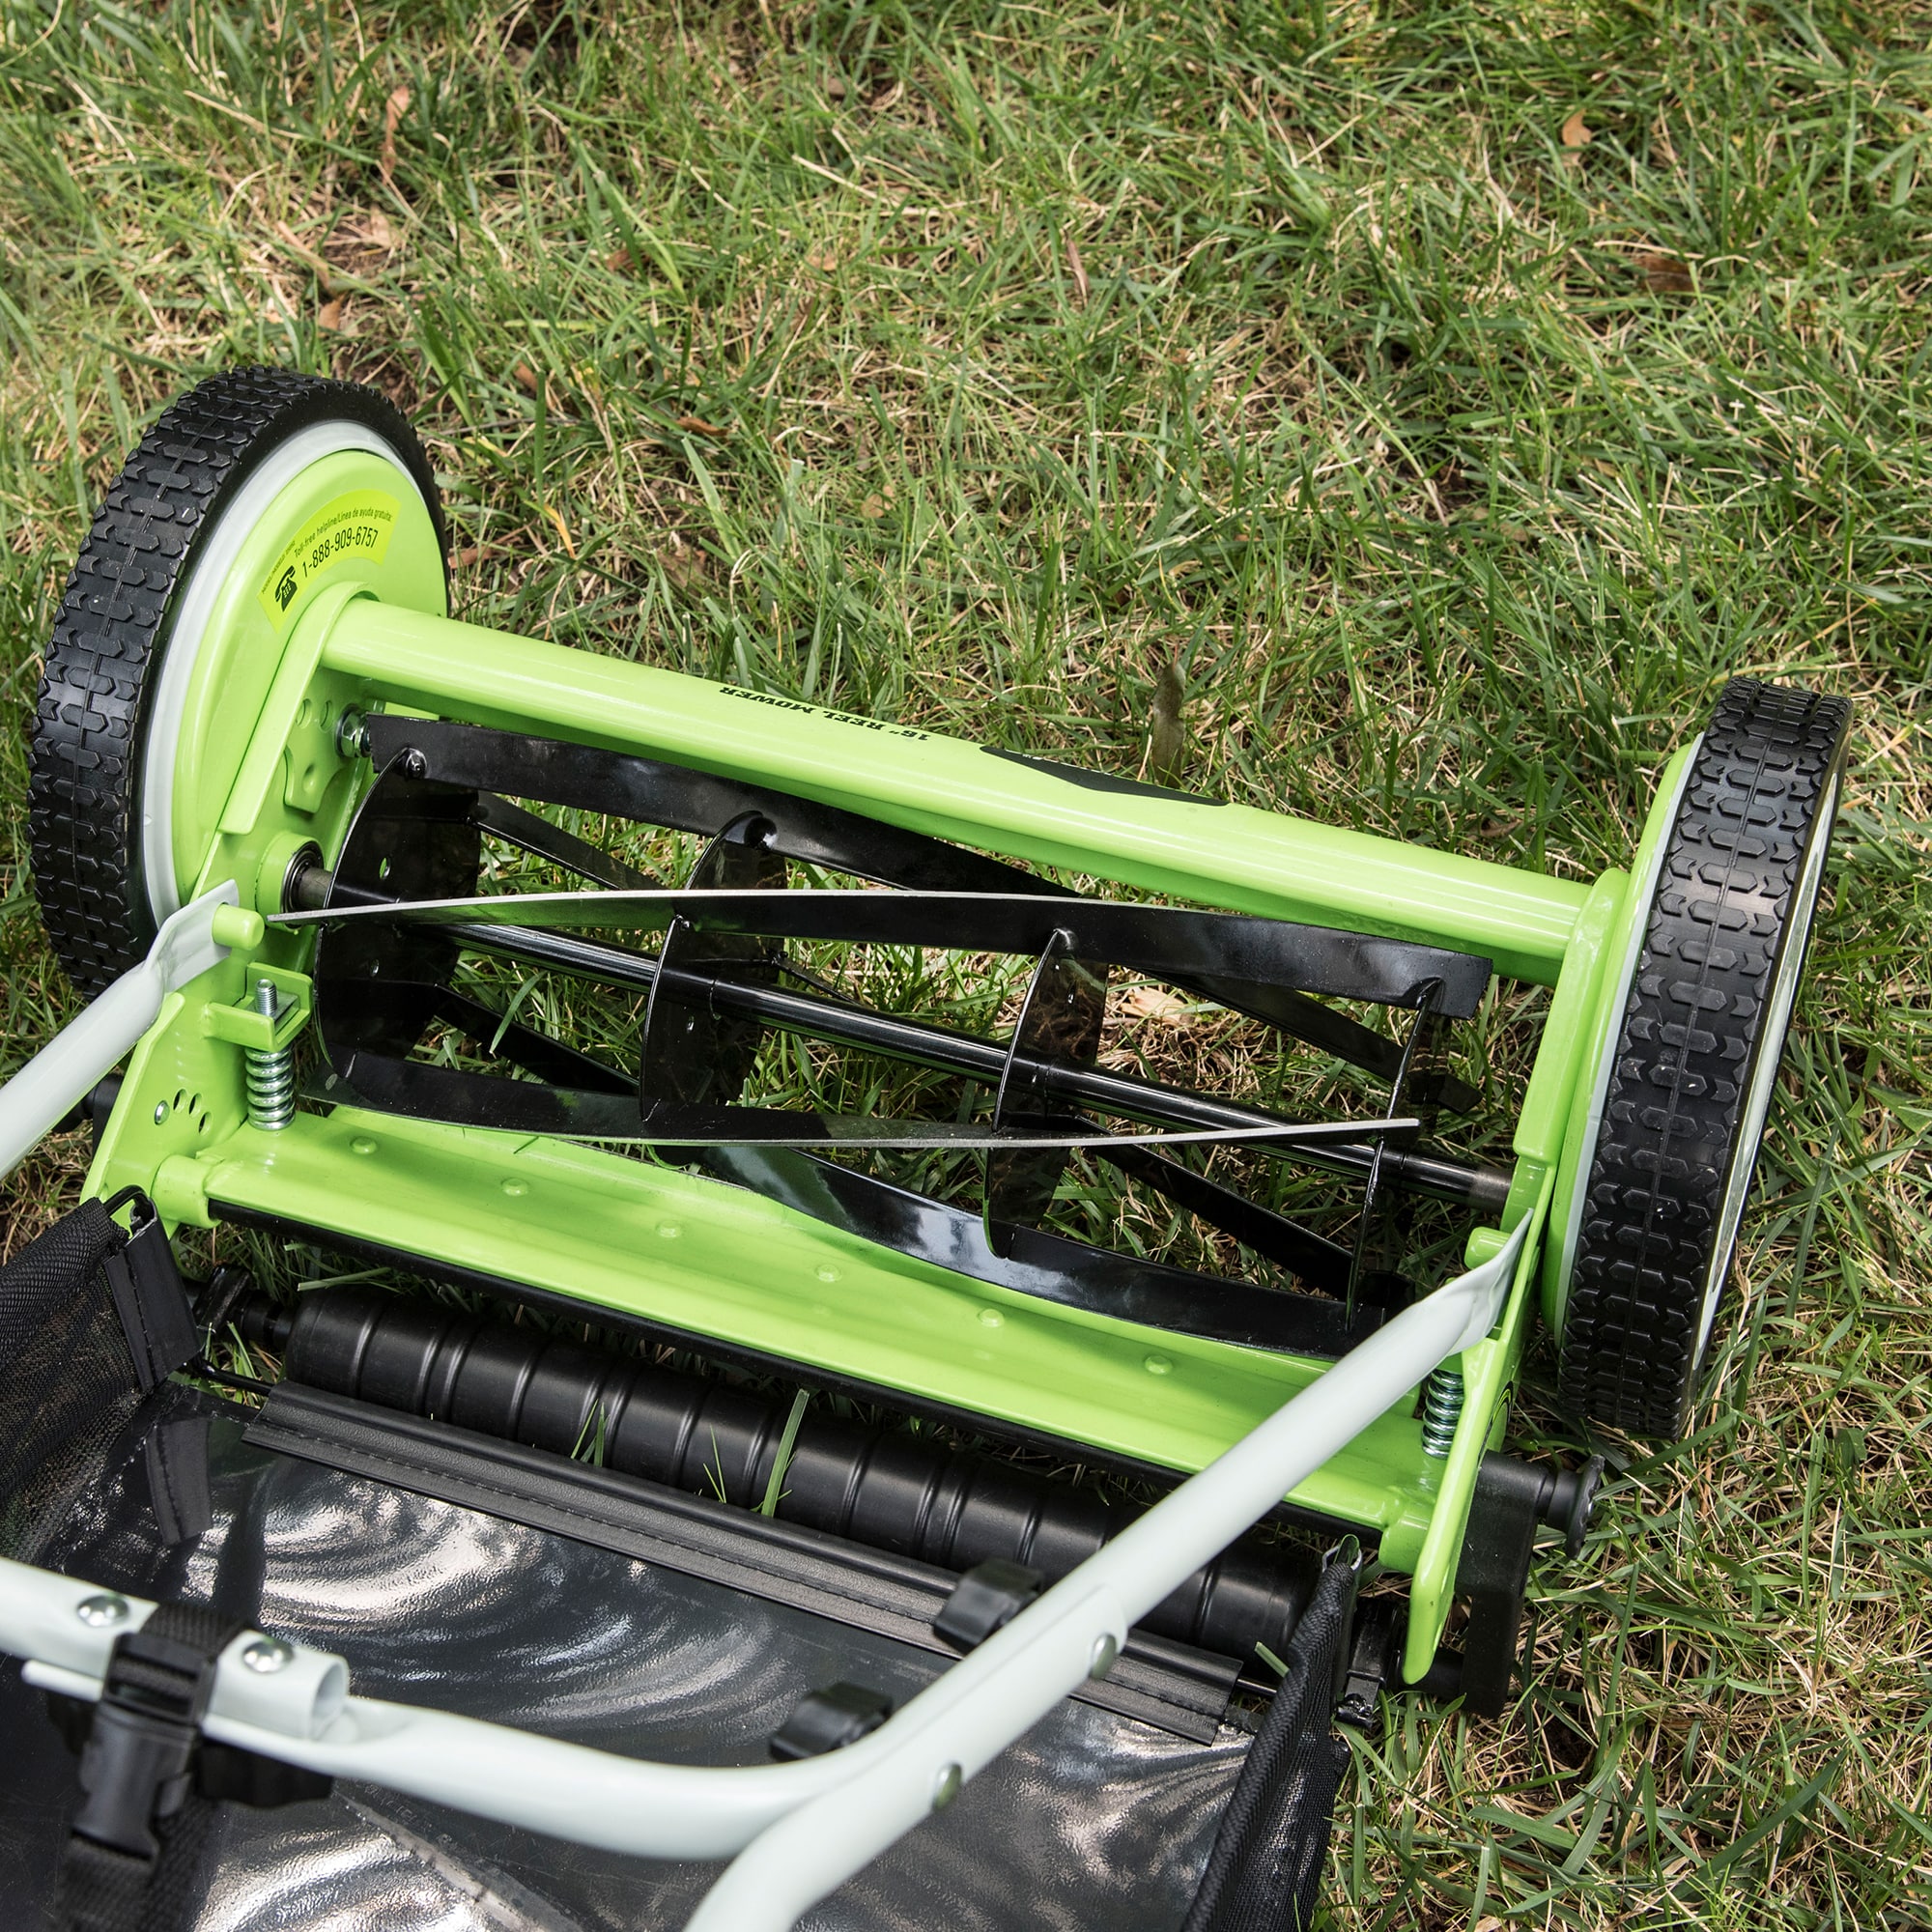 Greenworks undefined in the Reel Lawn Mowers department at